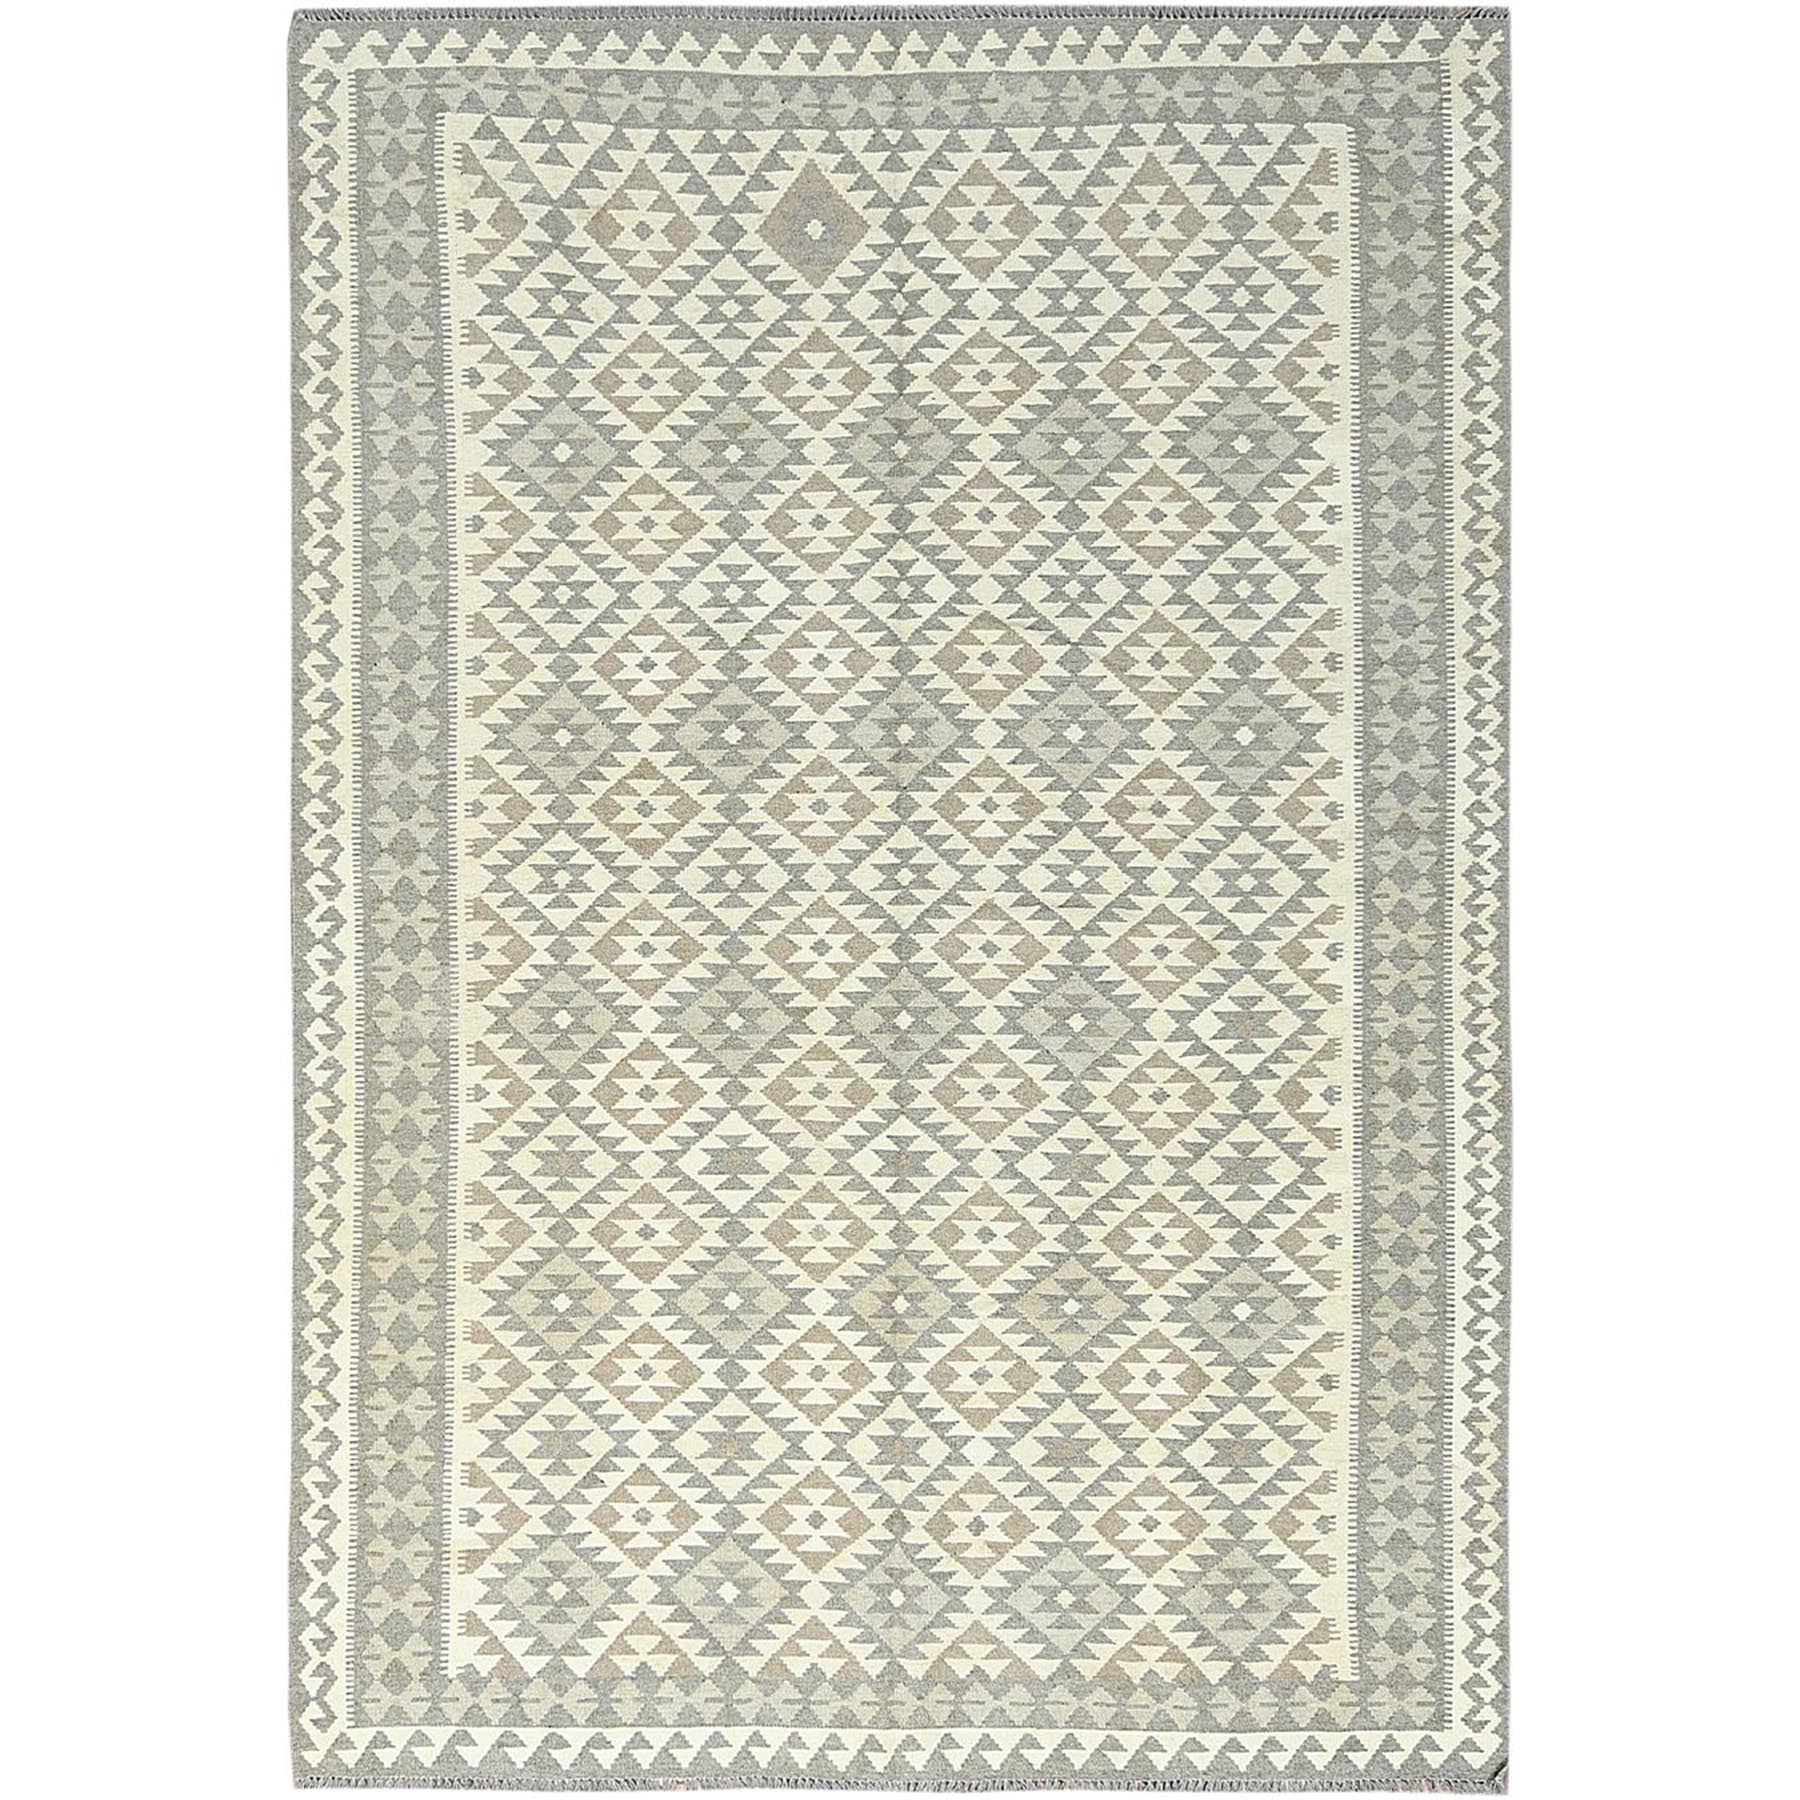 traditional Wool Hand-Woven Area Rug 6'6